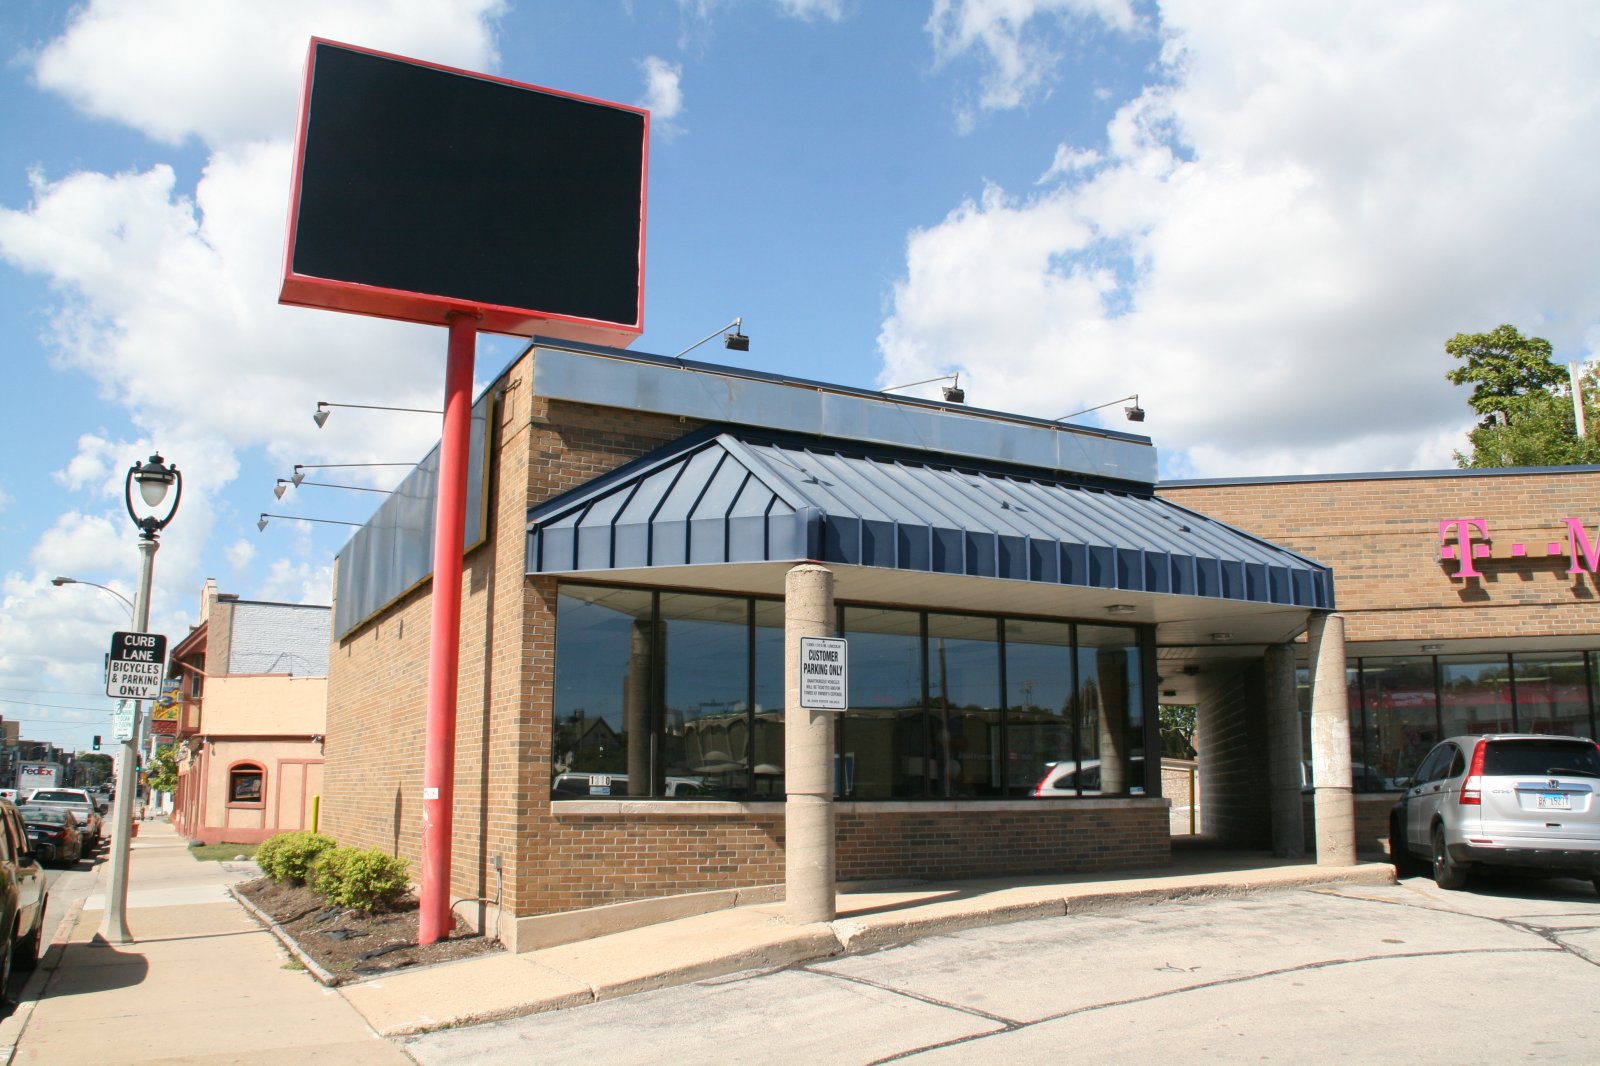 Republican National Committee Community Center